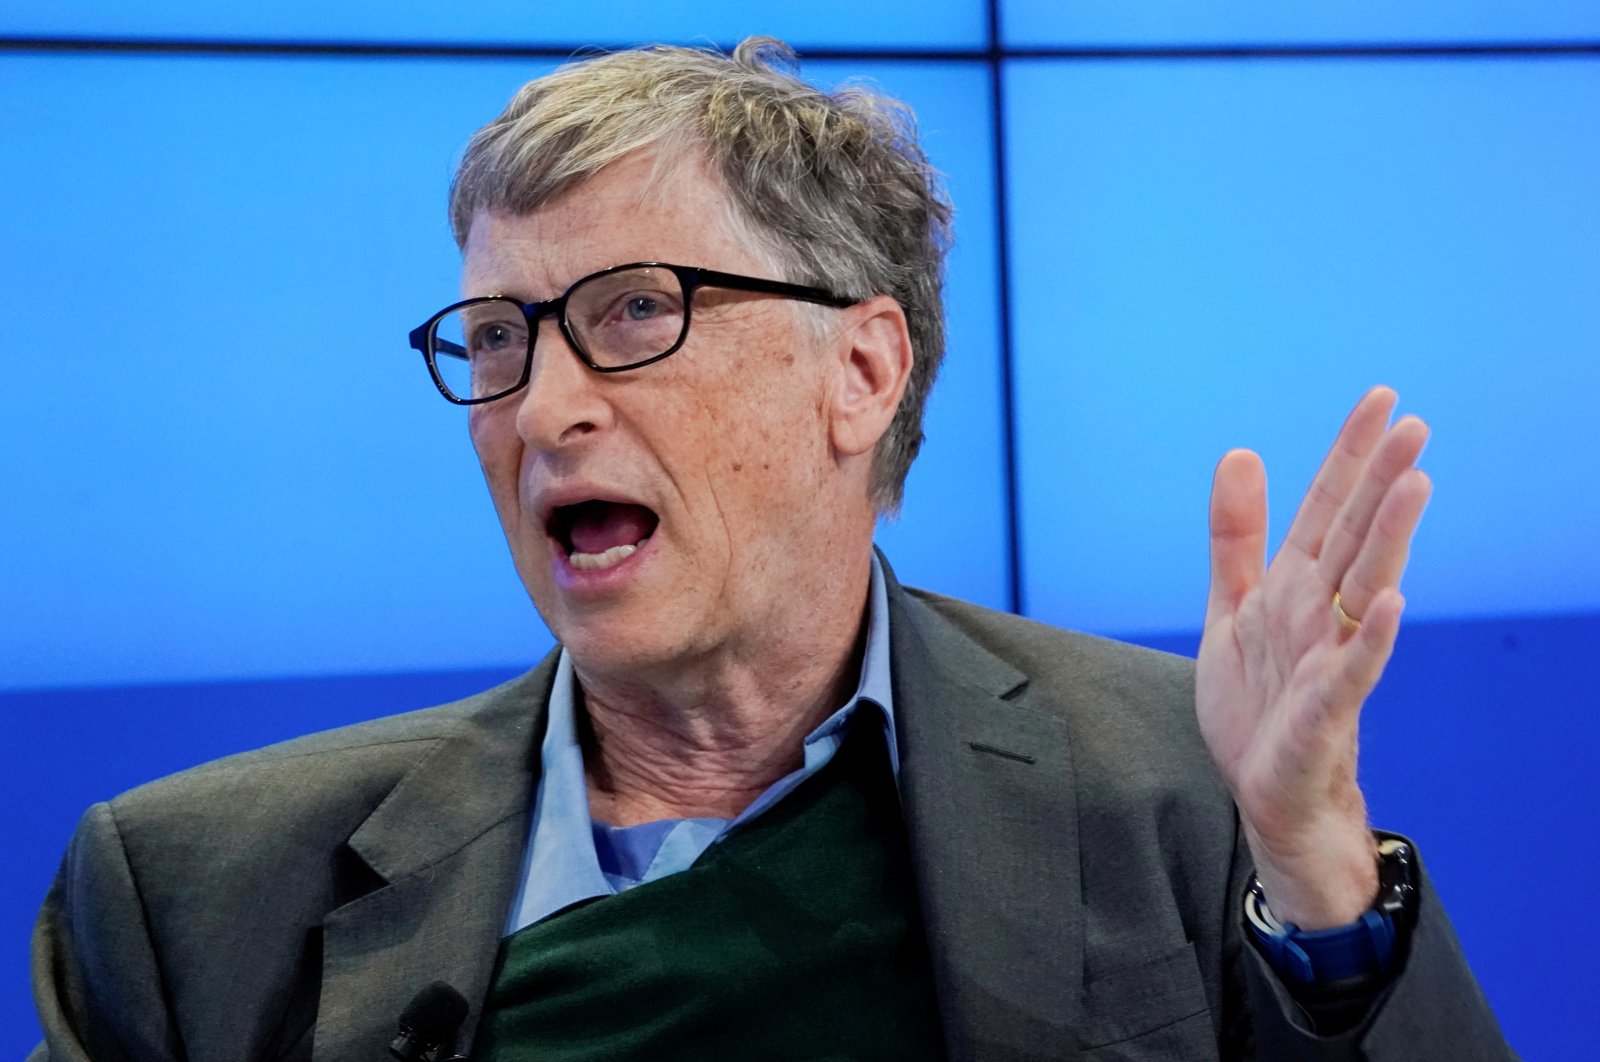 Bill Gates, Co-Chair of Bill & Melinda Gates Foundation, gestures as he speaks during the World Economic Forum (WEF) annual meeting in Davos, Switzerland on Jan. 25, 2018. (Reuters Photo)